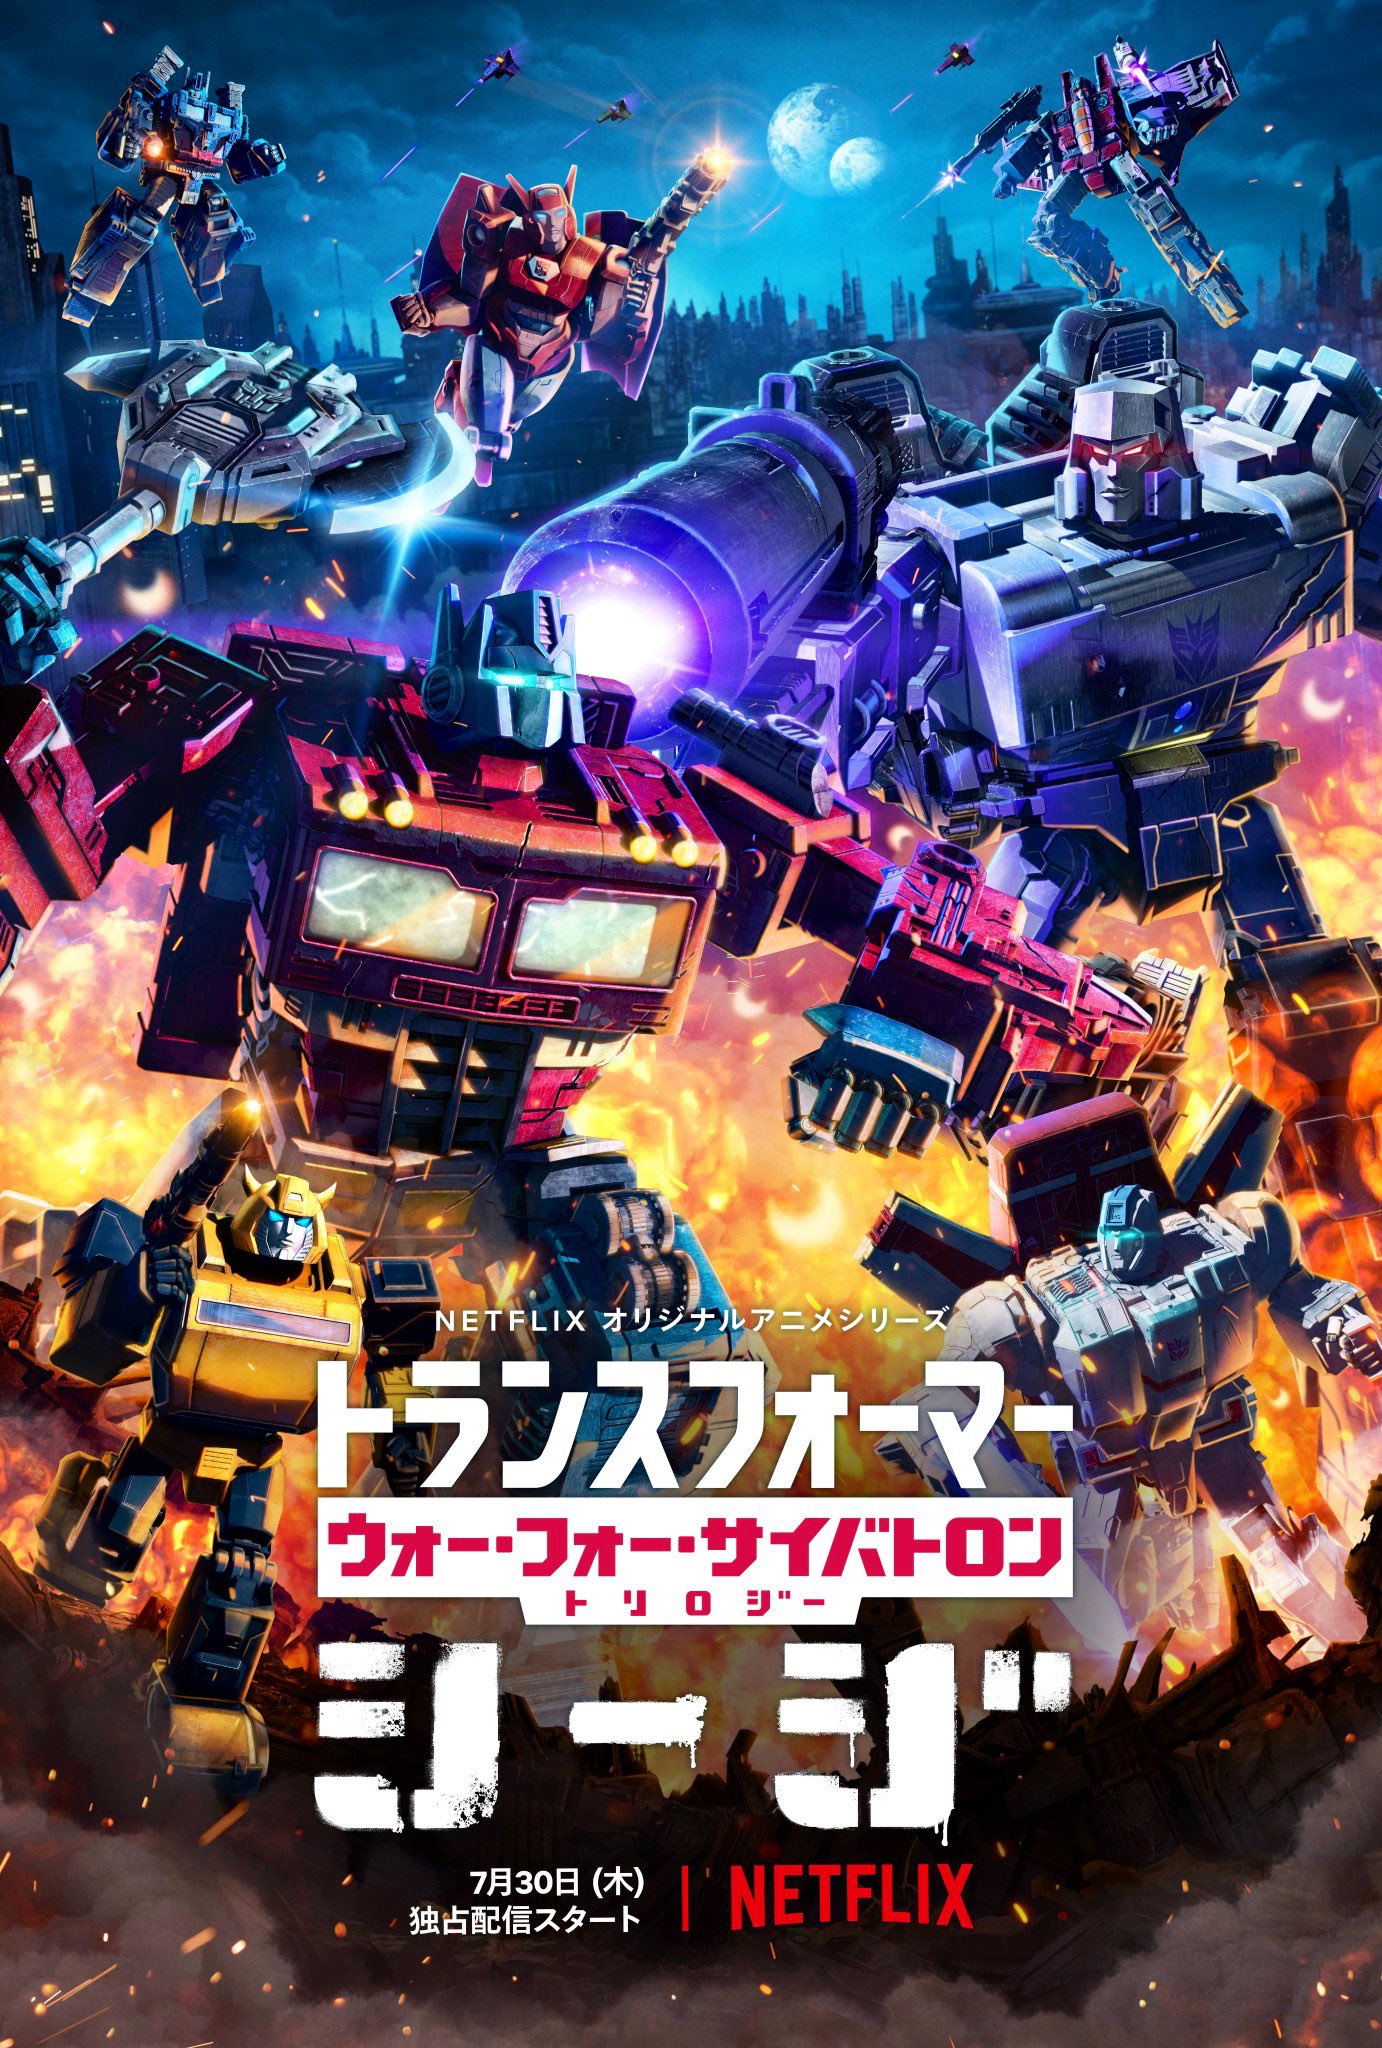 Luiz Fernando Netflixjapan Released A Teaser Poster Of Transformerswarforcybertron Anime Movie Trilogy That Will Be Launched On Jul 30 In The Platform Transformerswfc Is A New Investment By Netflix Into